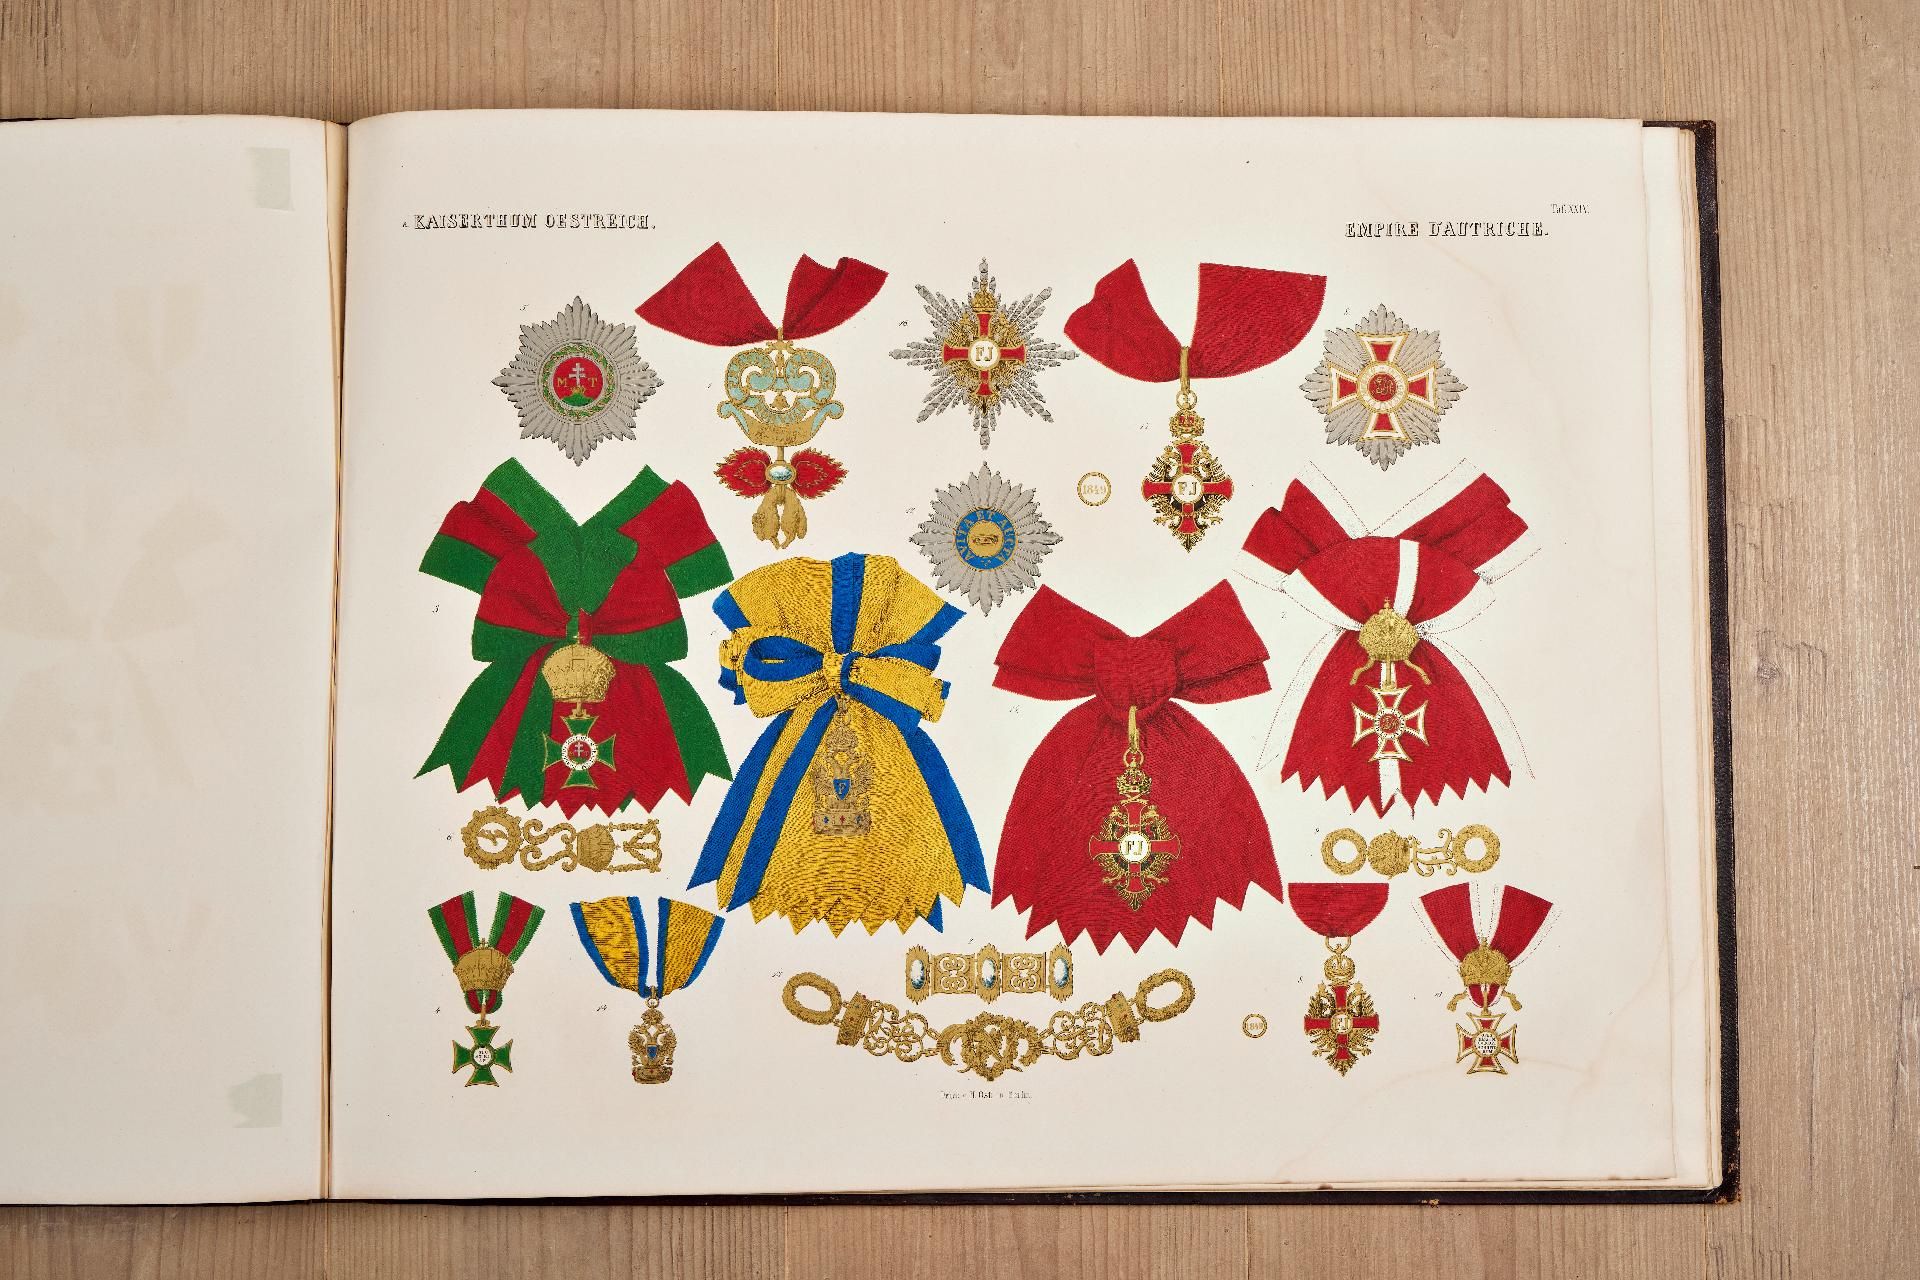 Books on Orders and Medals : H. Schulze - Illustrations to the chronicle of all knights - orders... - Image 3 of 13